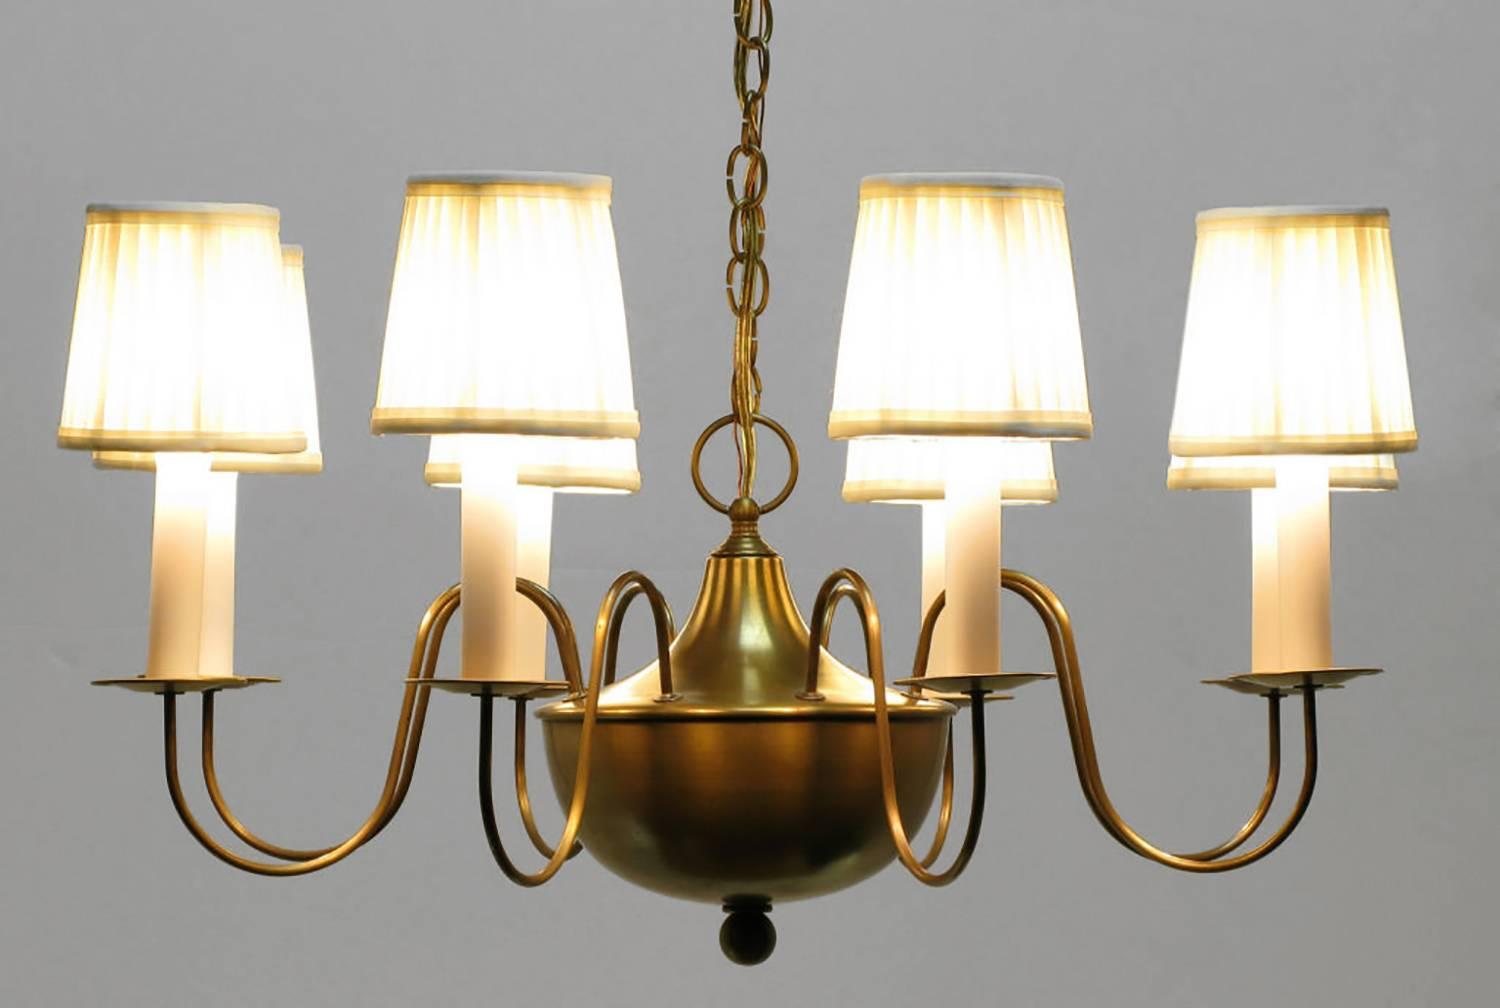 American Fine Hand-Spun Brass Eight-Light Chandelier with Delicate Arms For Sale